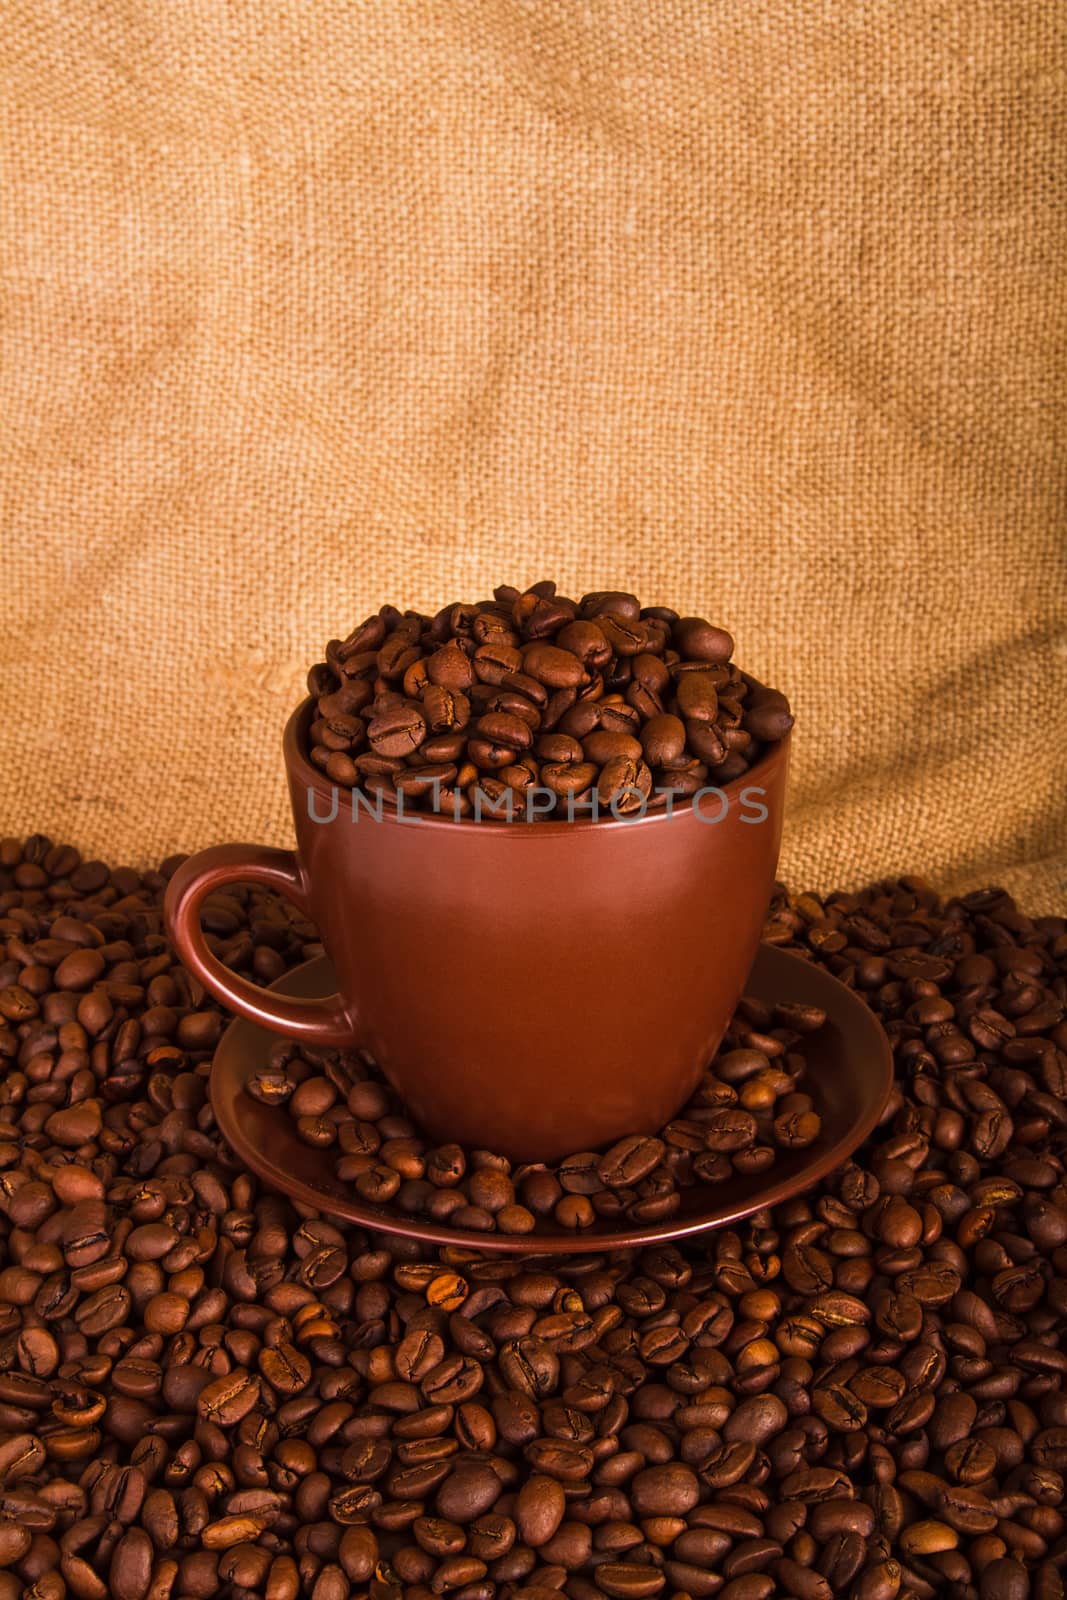 Cup full of coffee beans on the cloth sack